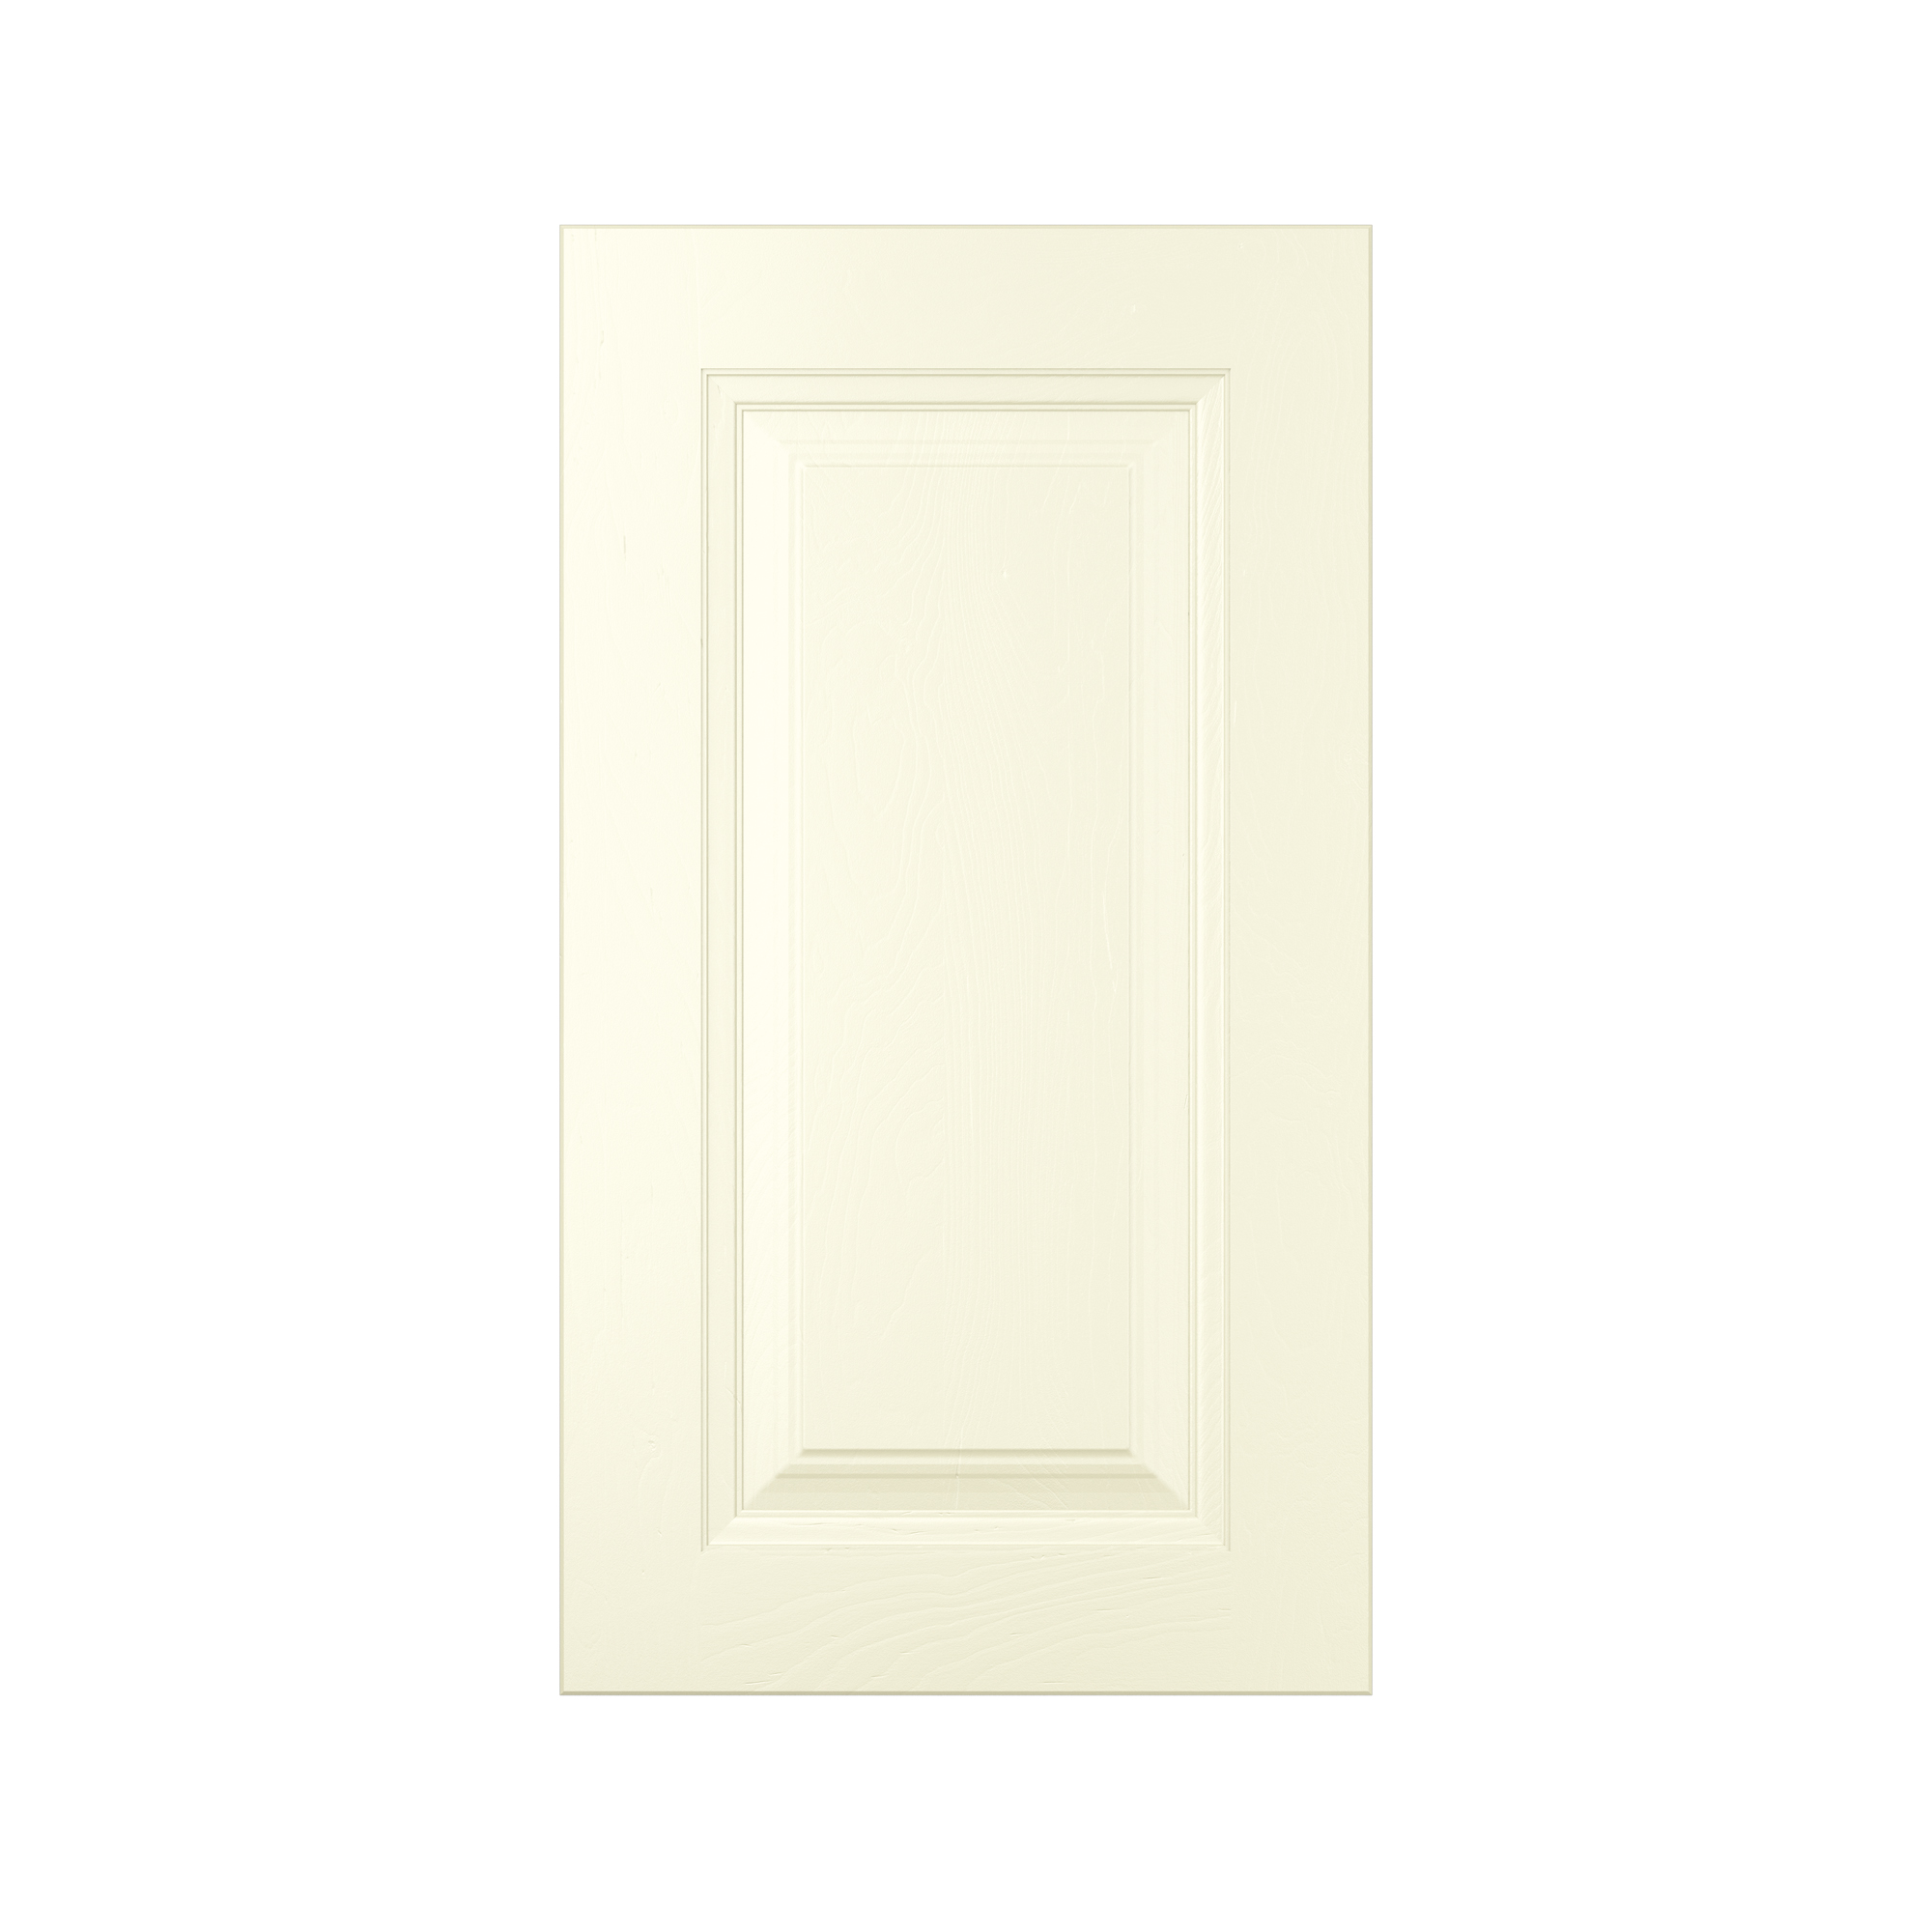 140 X 897 Routered Drawerfront - Jefferson Ivory